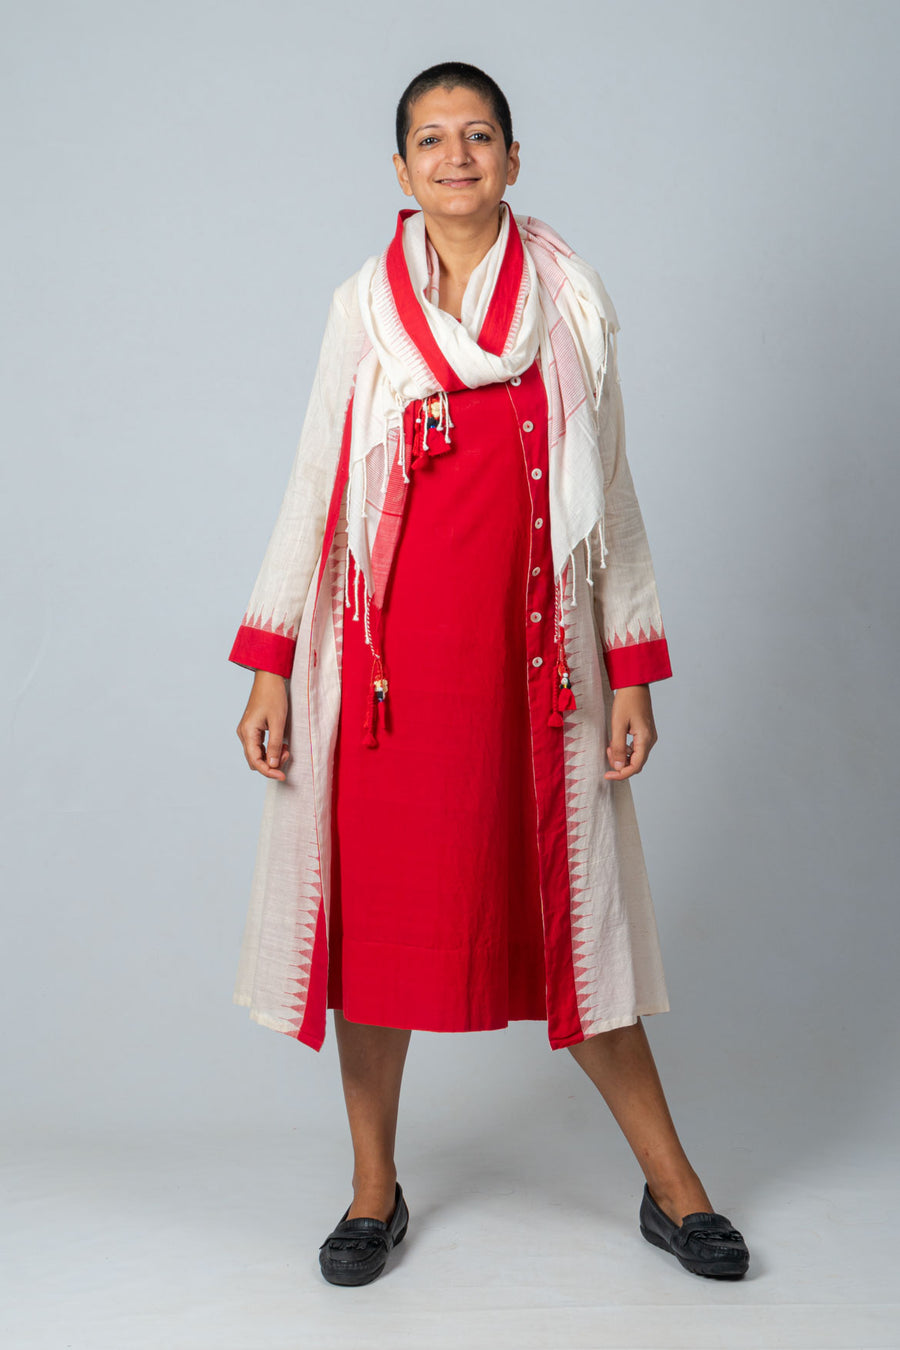 Off white with Red Temple Border Jacket - EREWANI